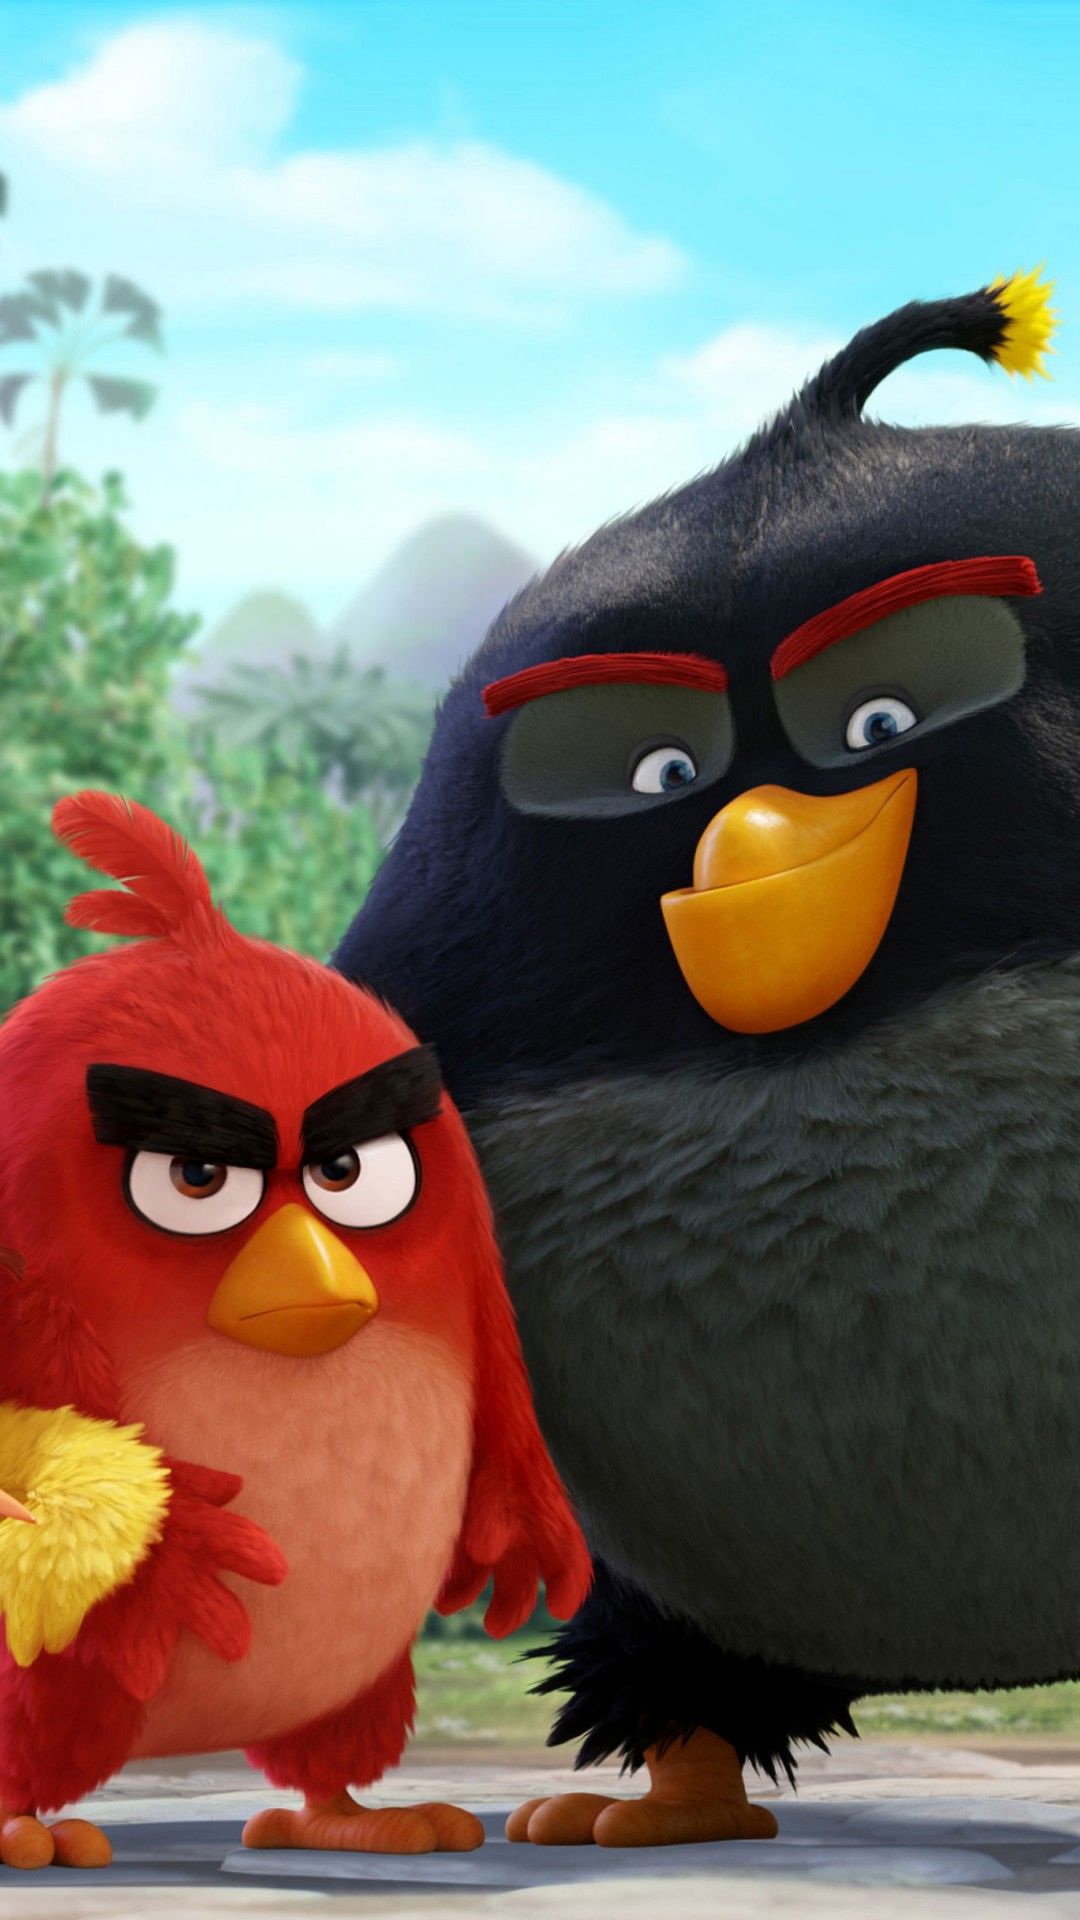 Wallpaper Chuck, Red, Bomb, Angry Birds, 4K, Movies,. Wallpaper for iPhone, Android, Mobile and Desktop